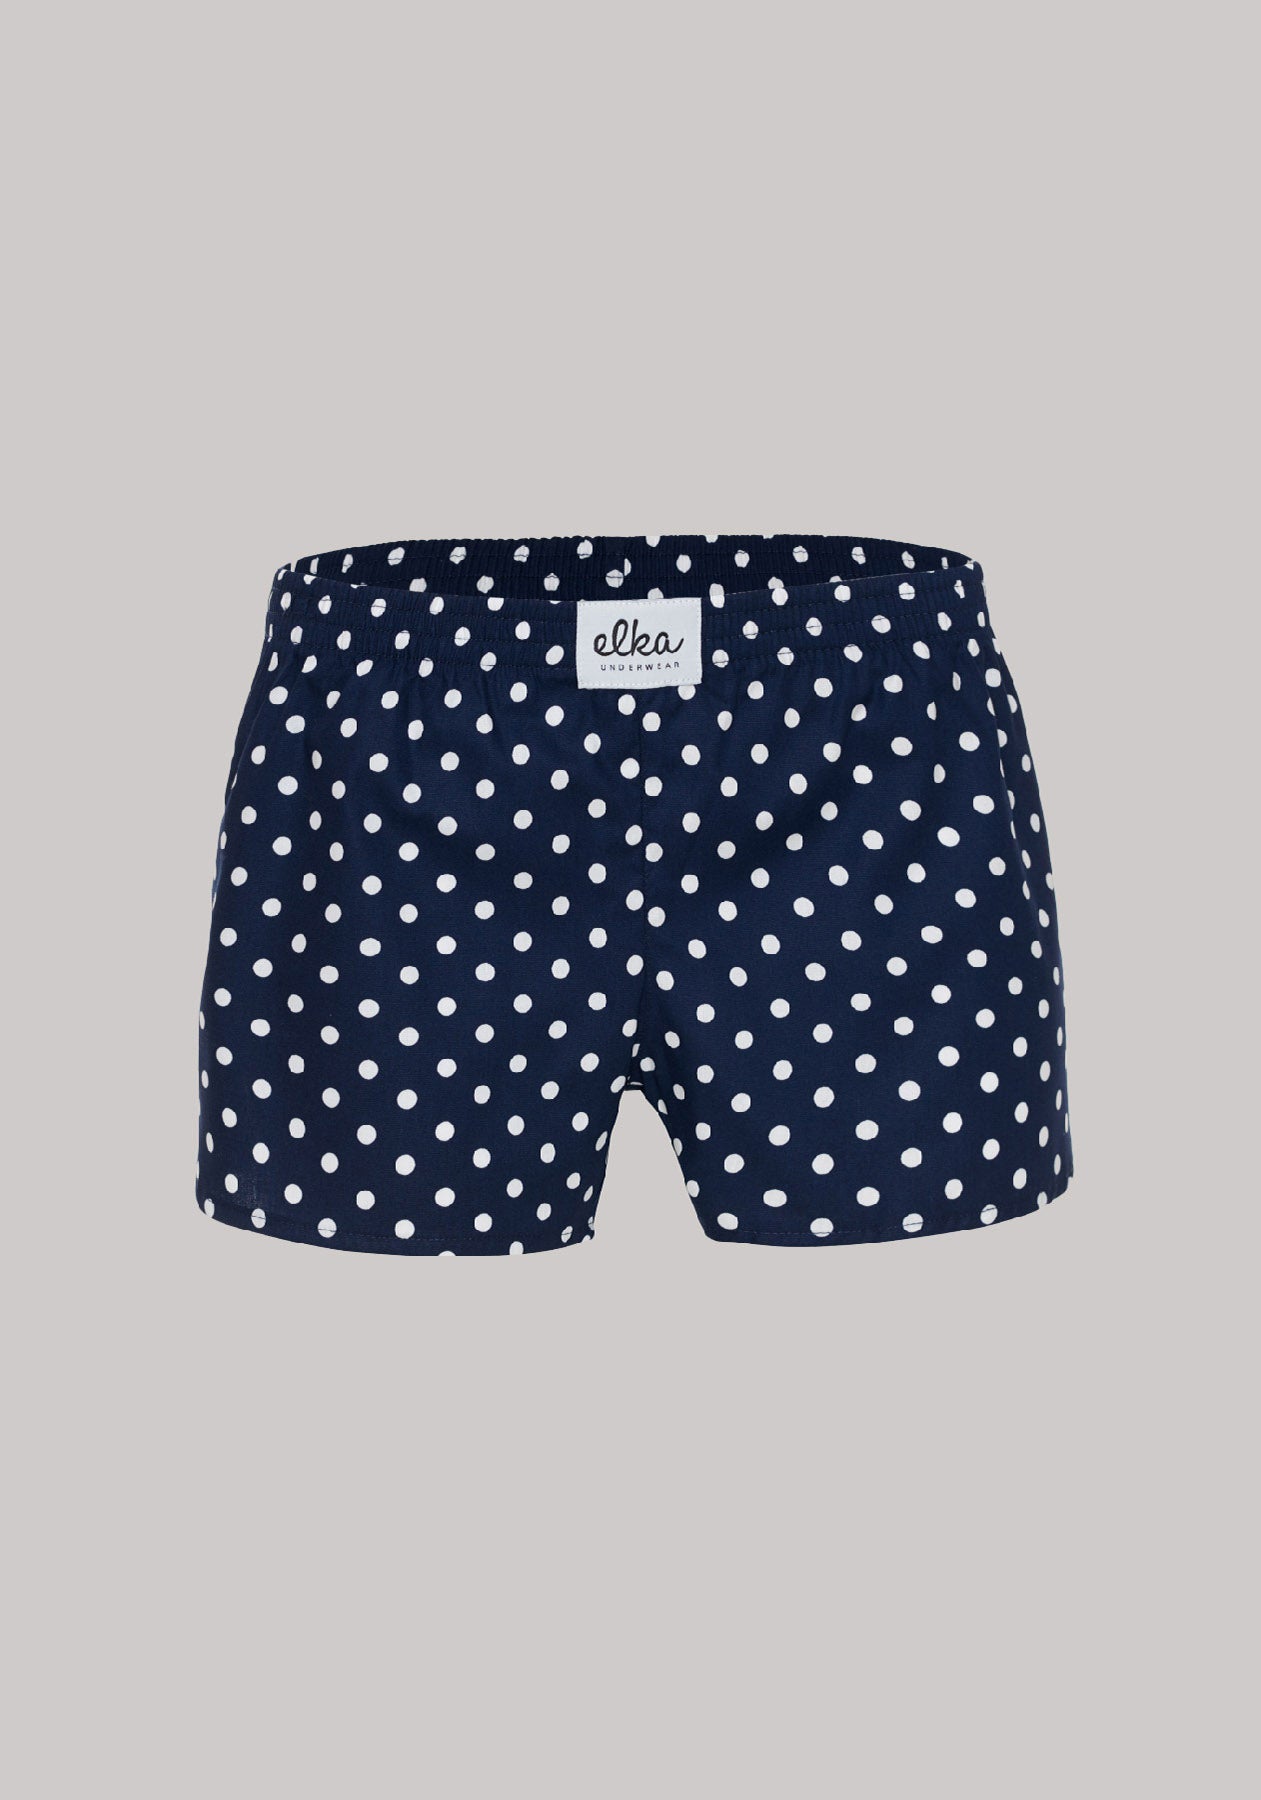 Women's shorts Blue with polka dots